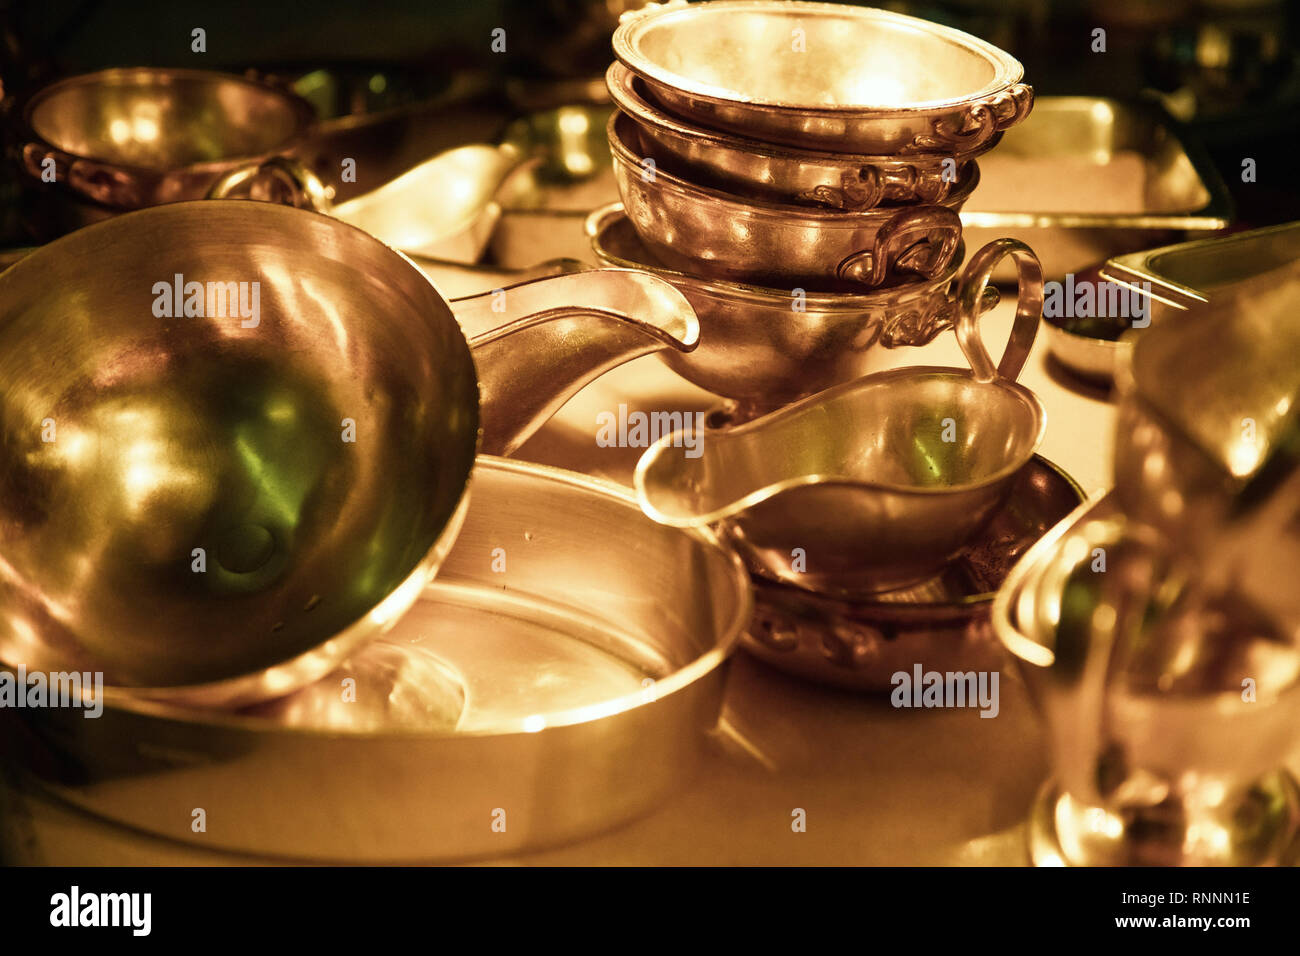 Heavy silver bowls and sauce bowls stacked in golden light. Stock Photo